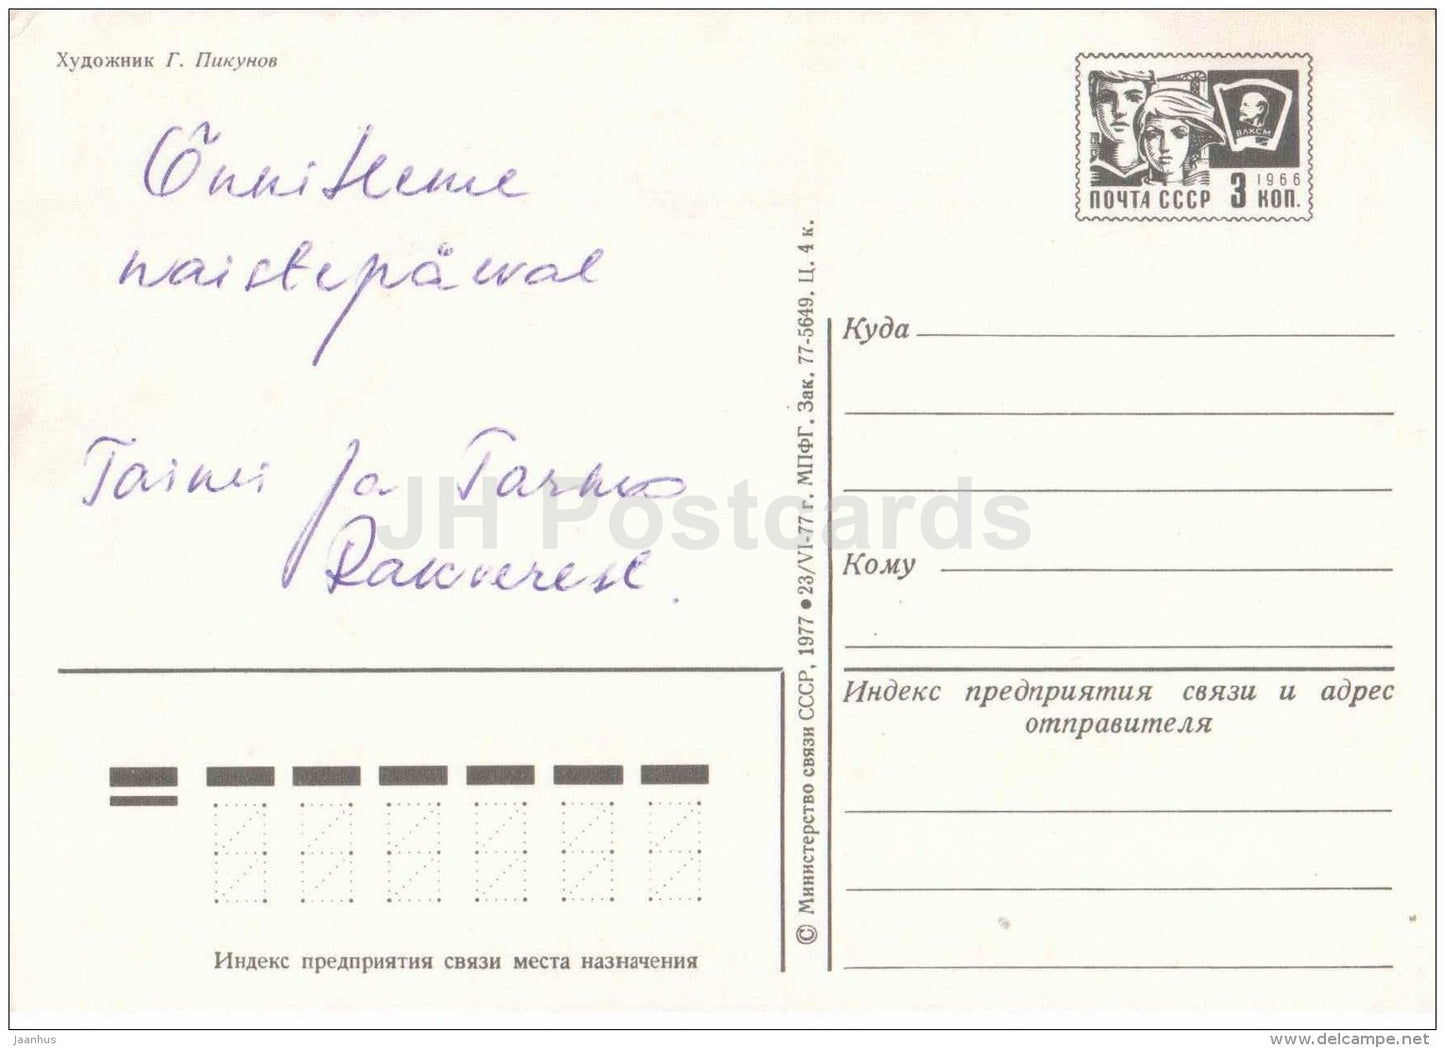 8 March International Women's Day greeting card - red carnation flowers - postal stationery - 1977 - Russia USSR - used - JH Postcards